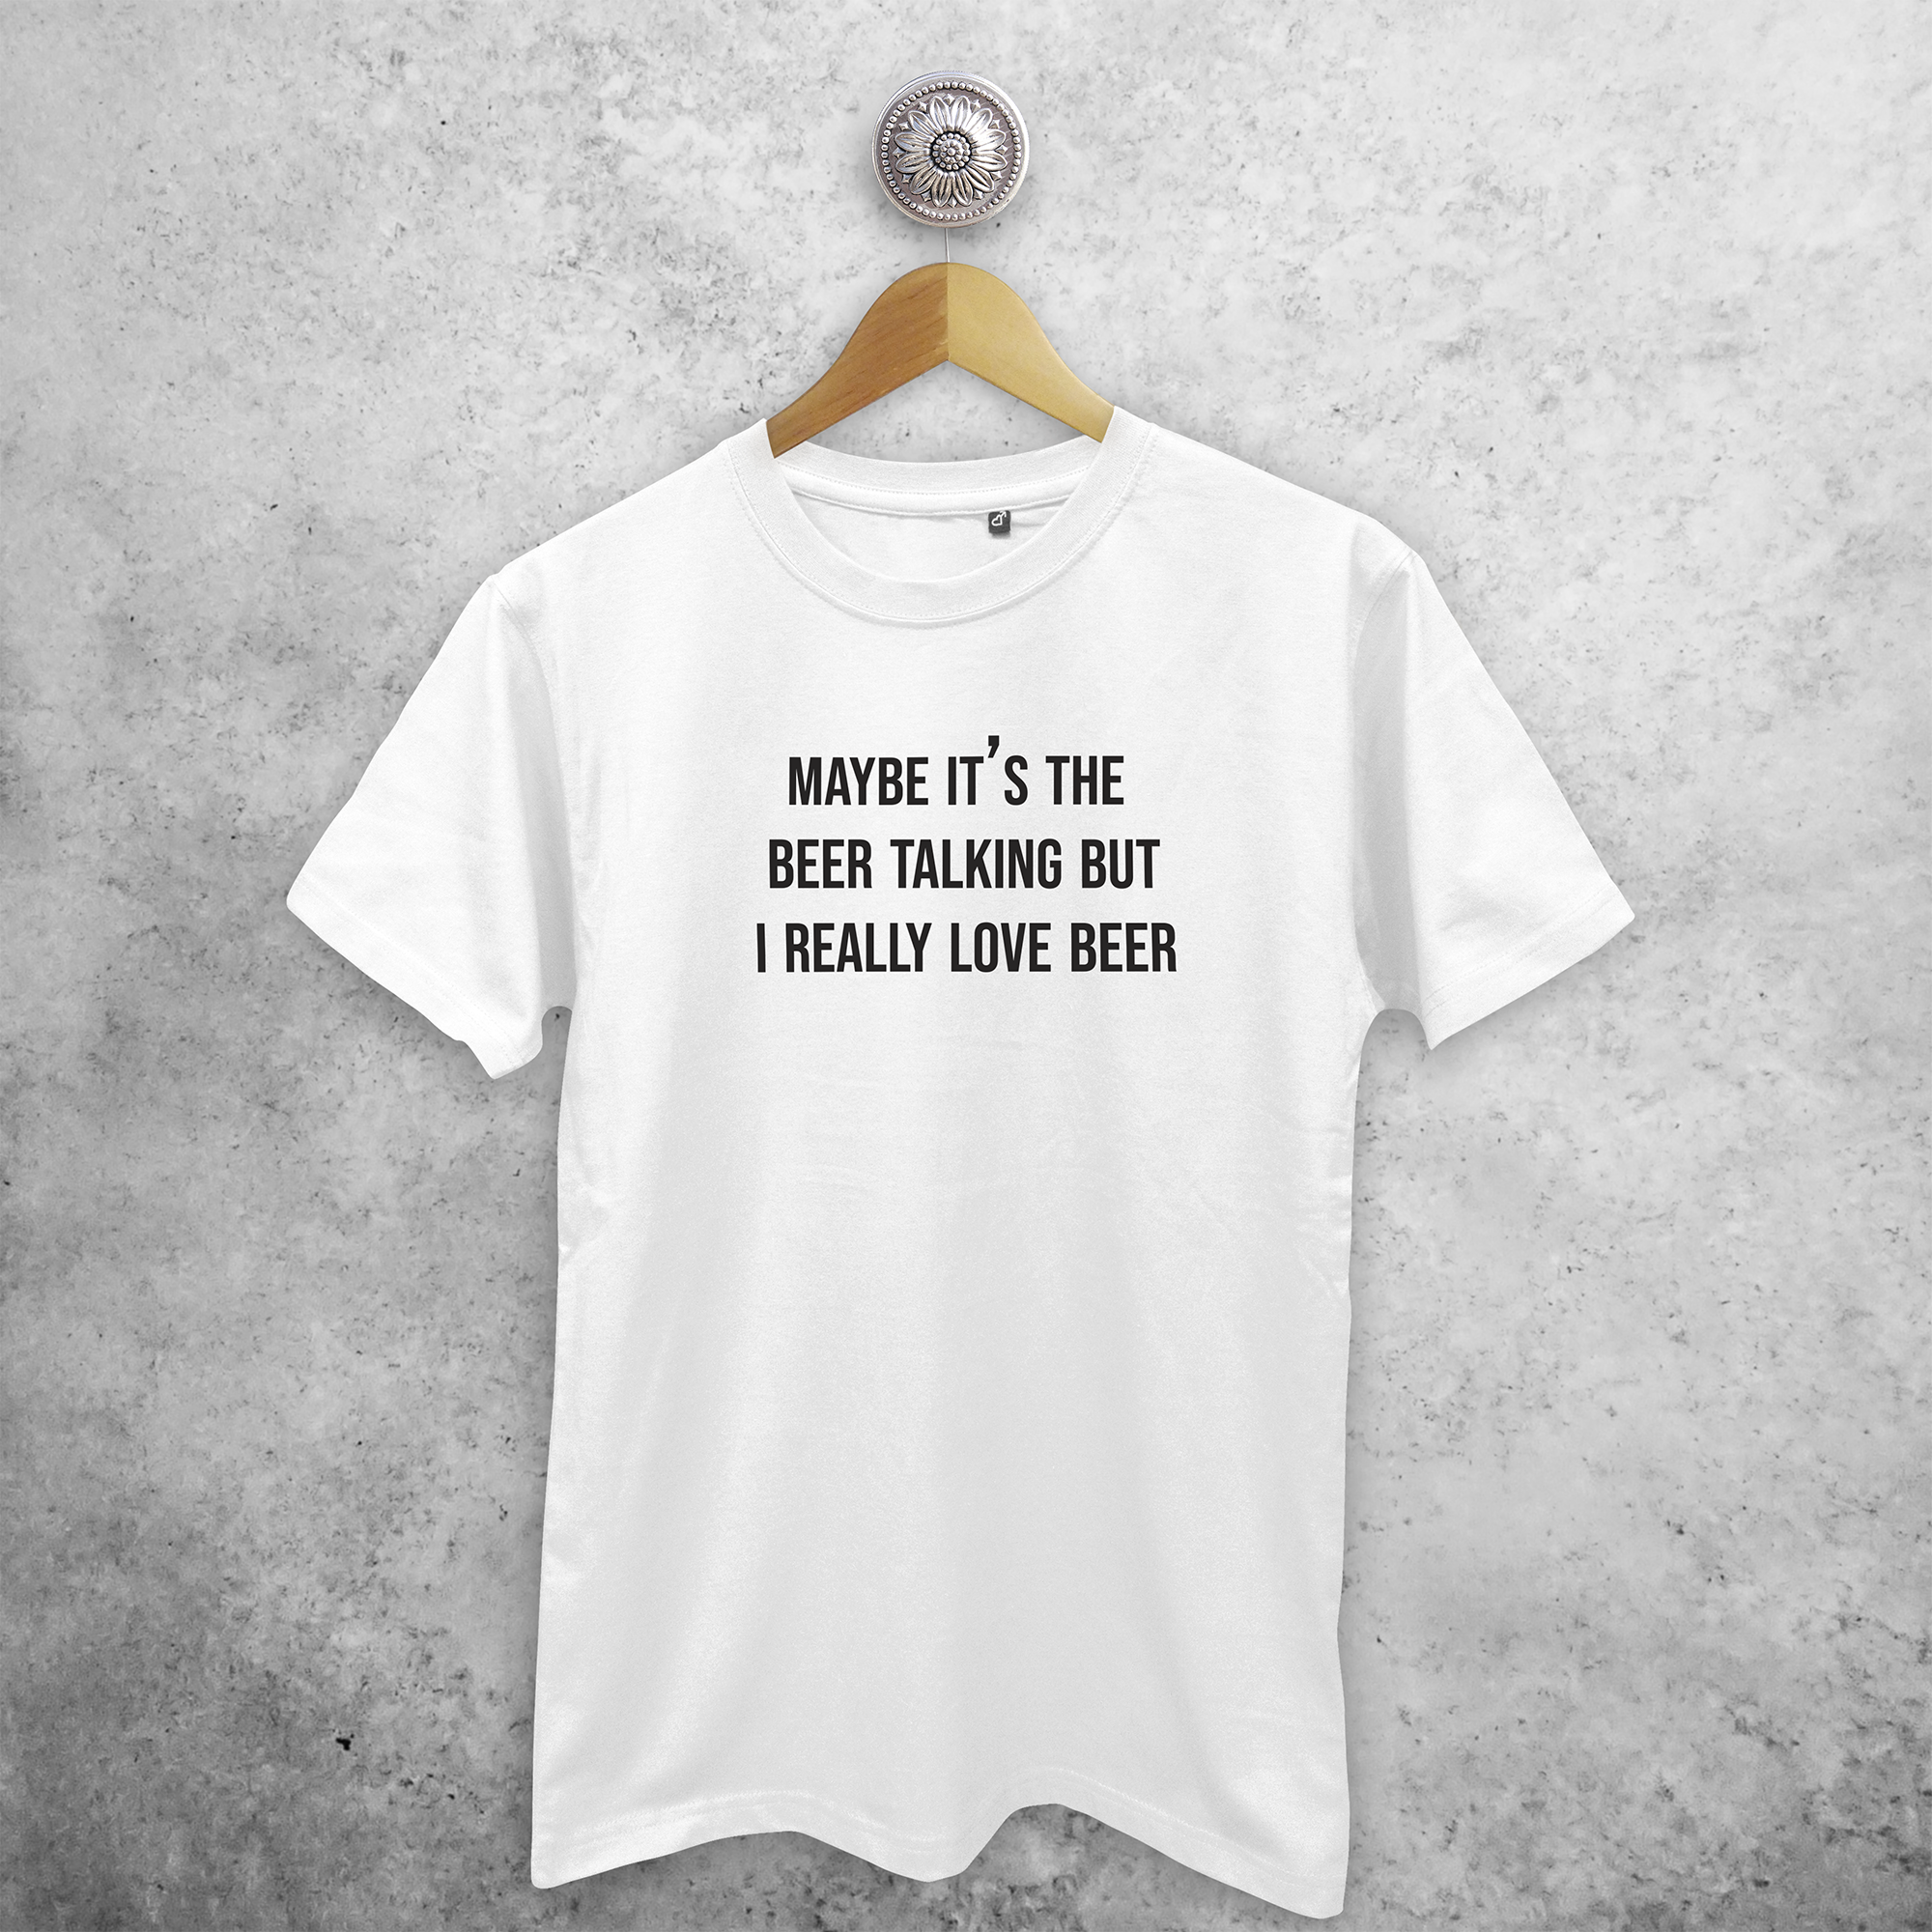 'Maybe it's the beer talking, but I really love beer' volwassene shirt